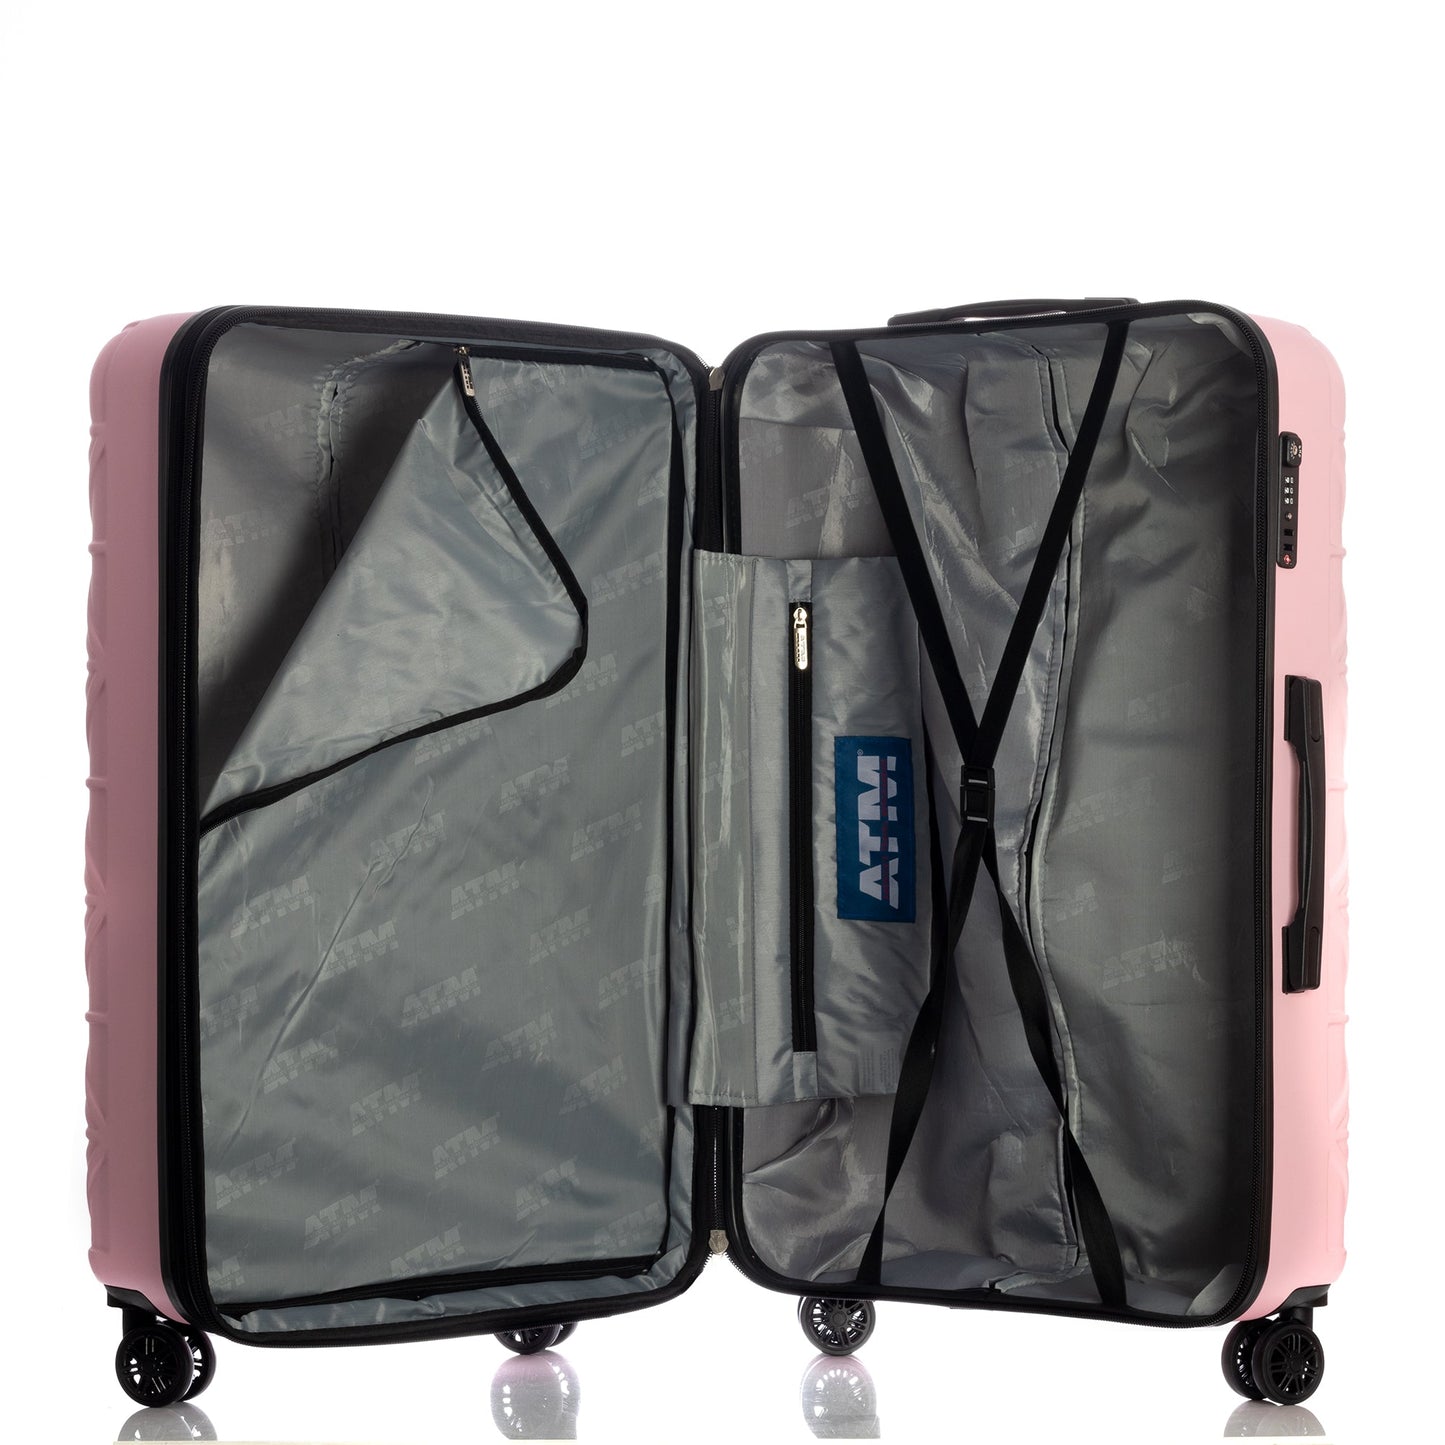 Cosmos Collection Pink Luggage (21/25/29") Suitcase Lock Spinner Hardshell